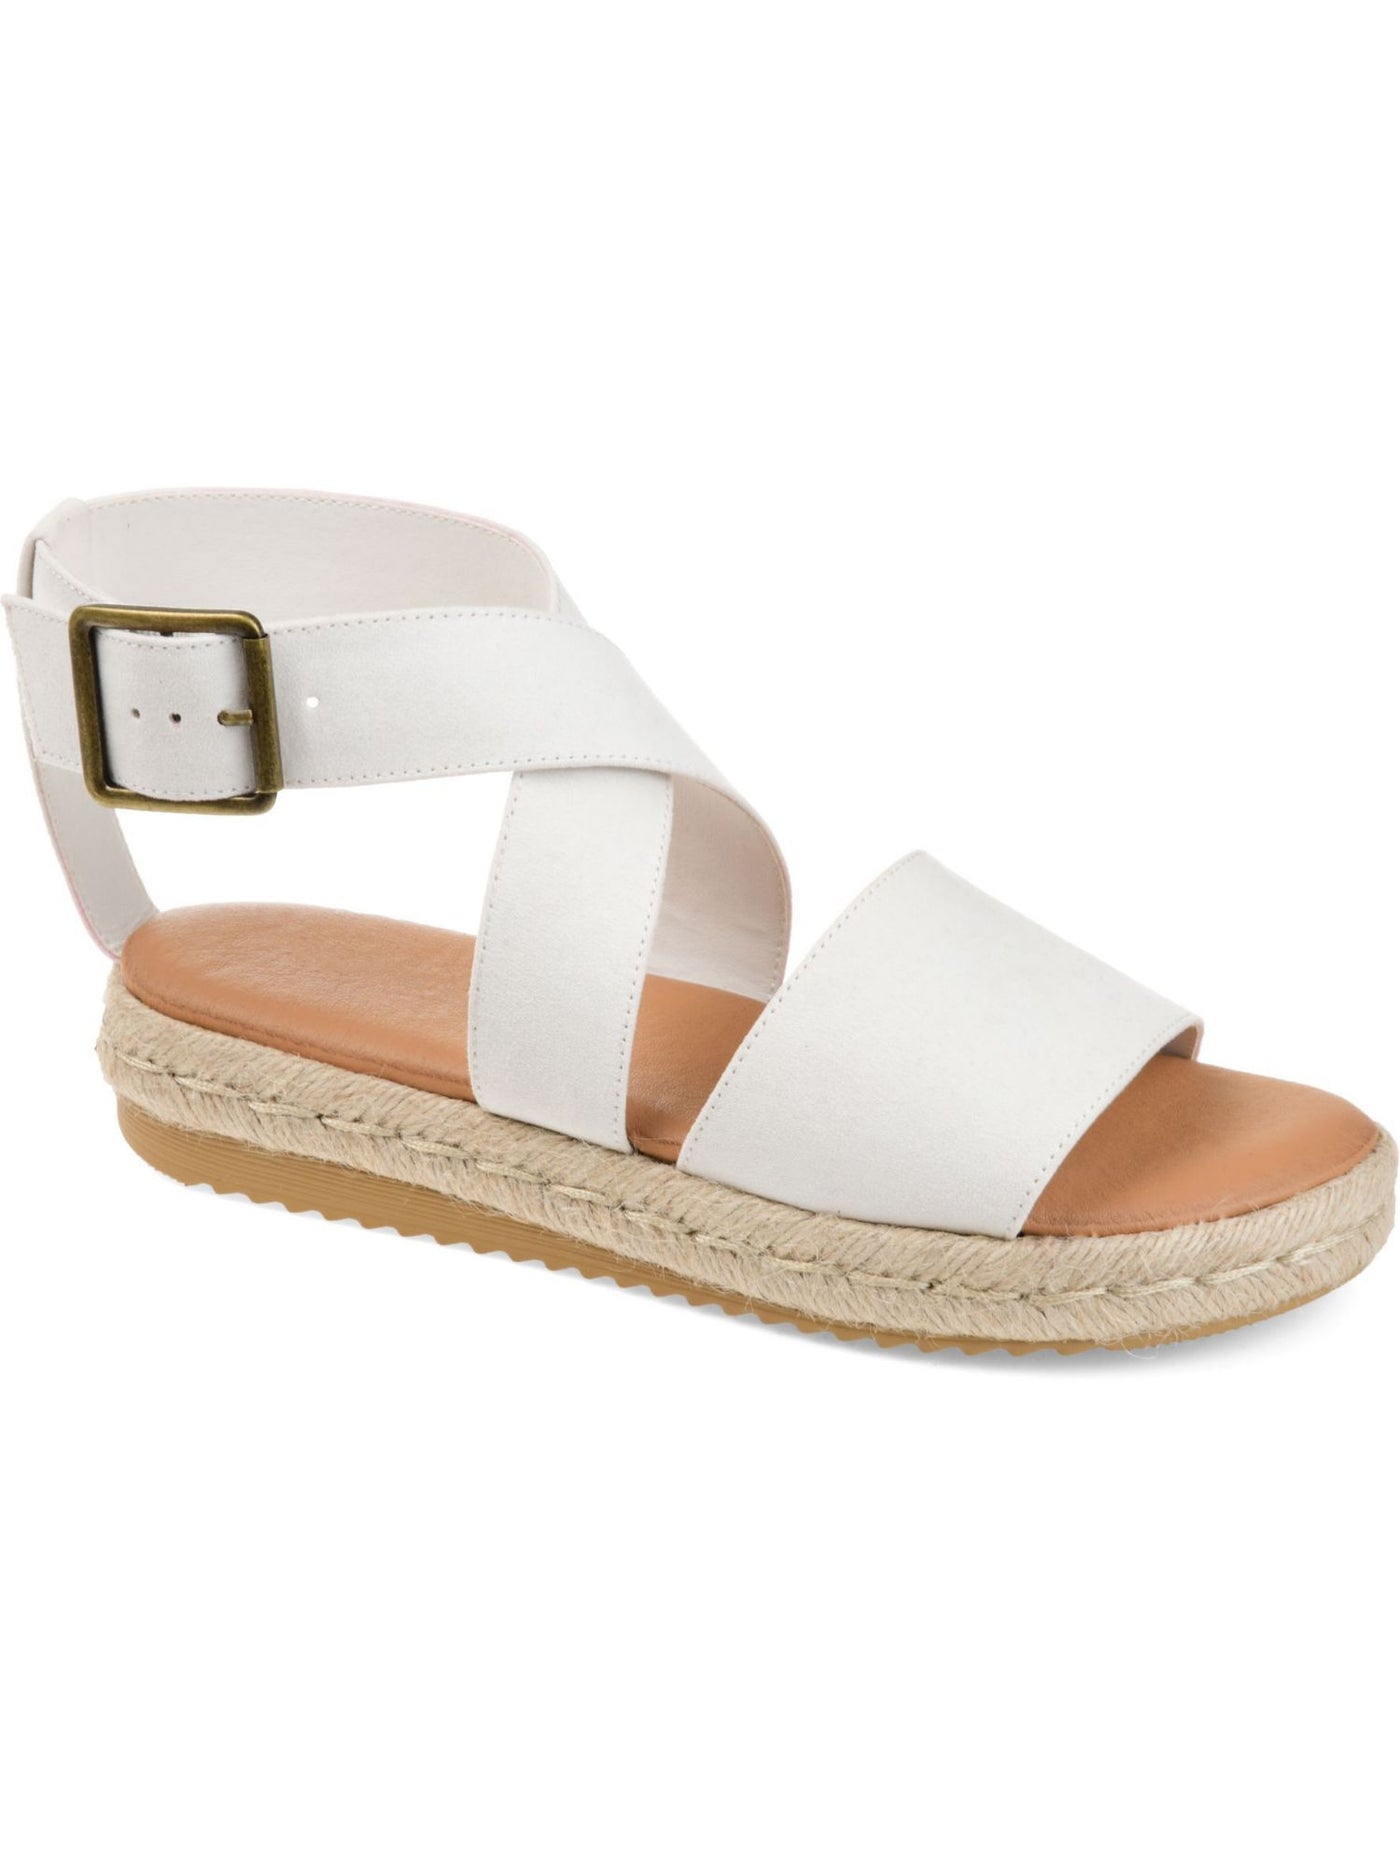 JOURNEE COLLECTION Womens White Animal Print Cushioned Stretch Open Toe Wedge Buckle Espadrille Shoes 7